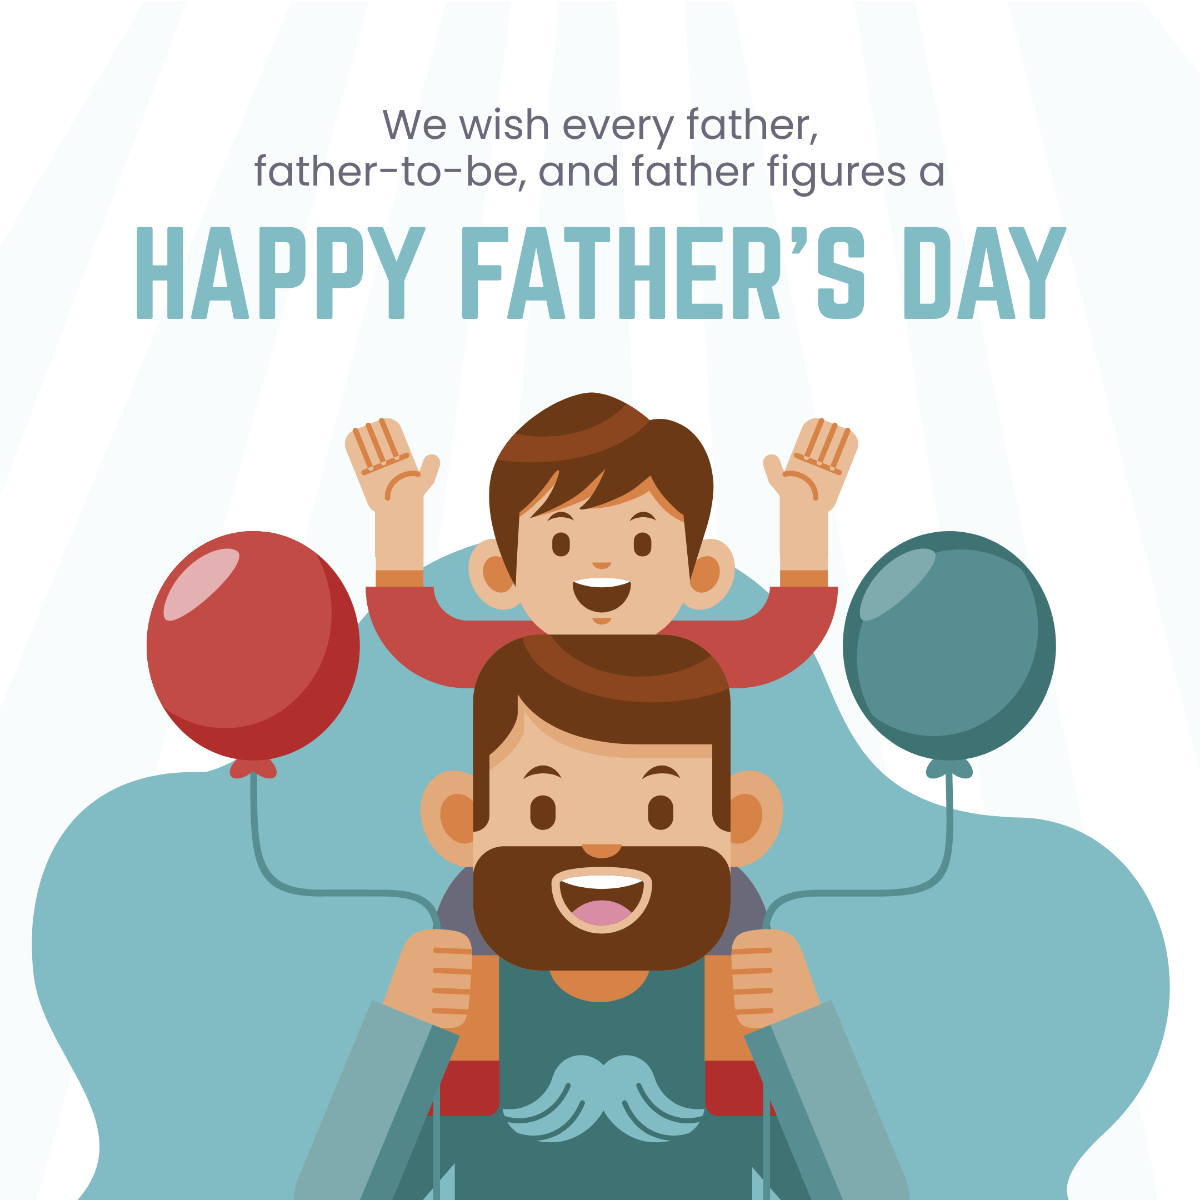 Happy Father's Day Wishes Template